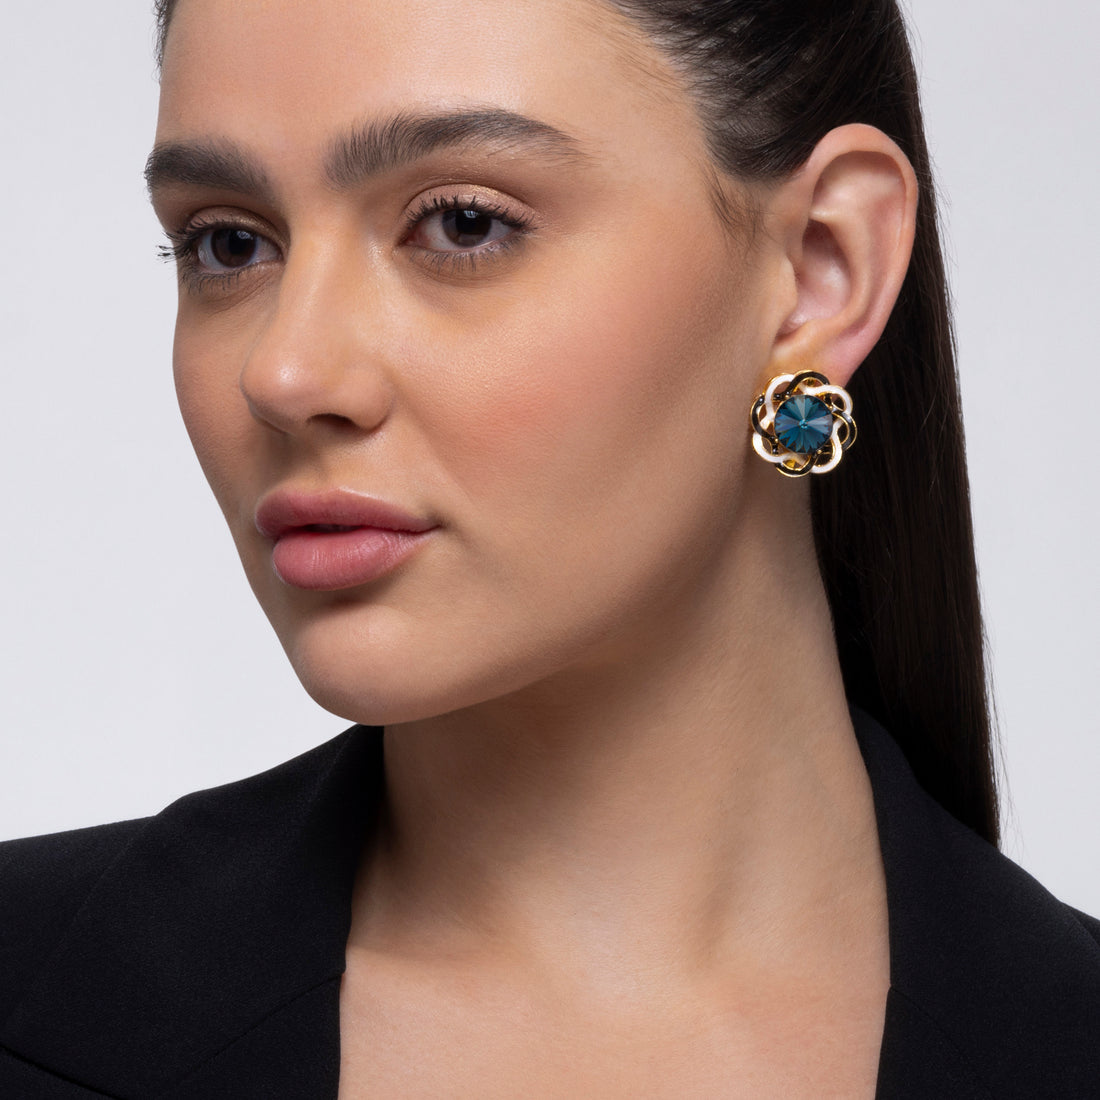 PRAO's Crystanamel Floral Studs